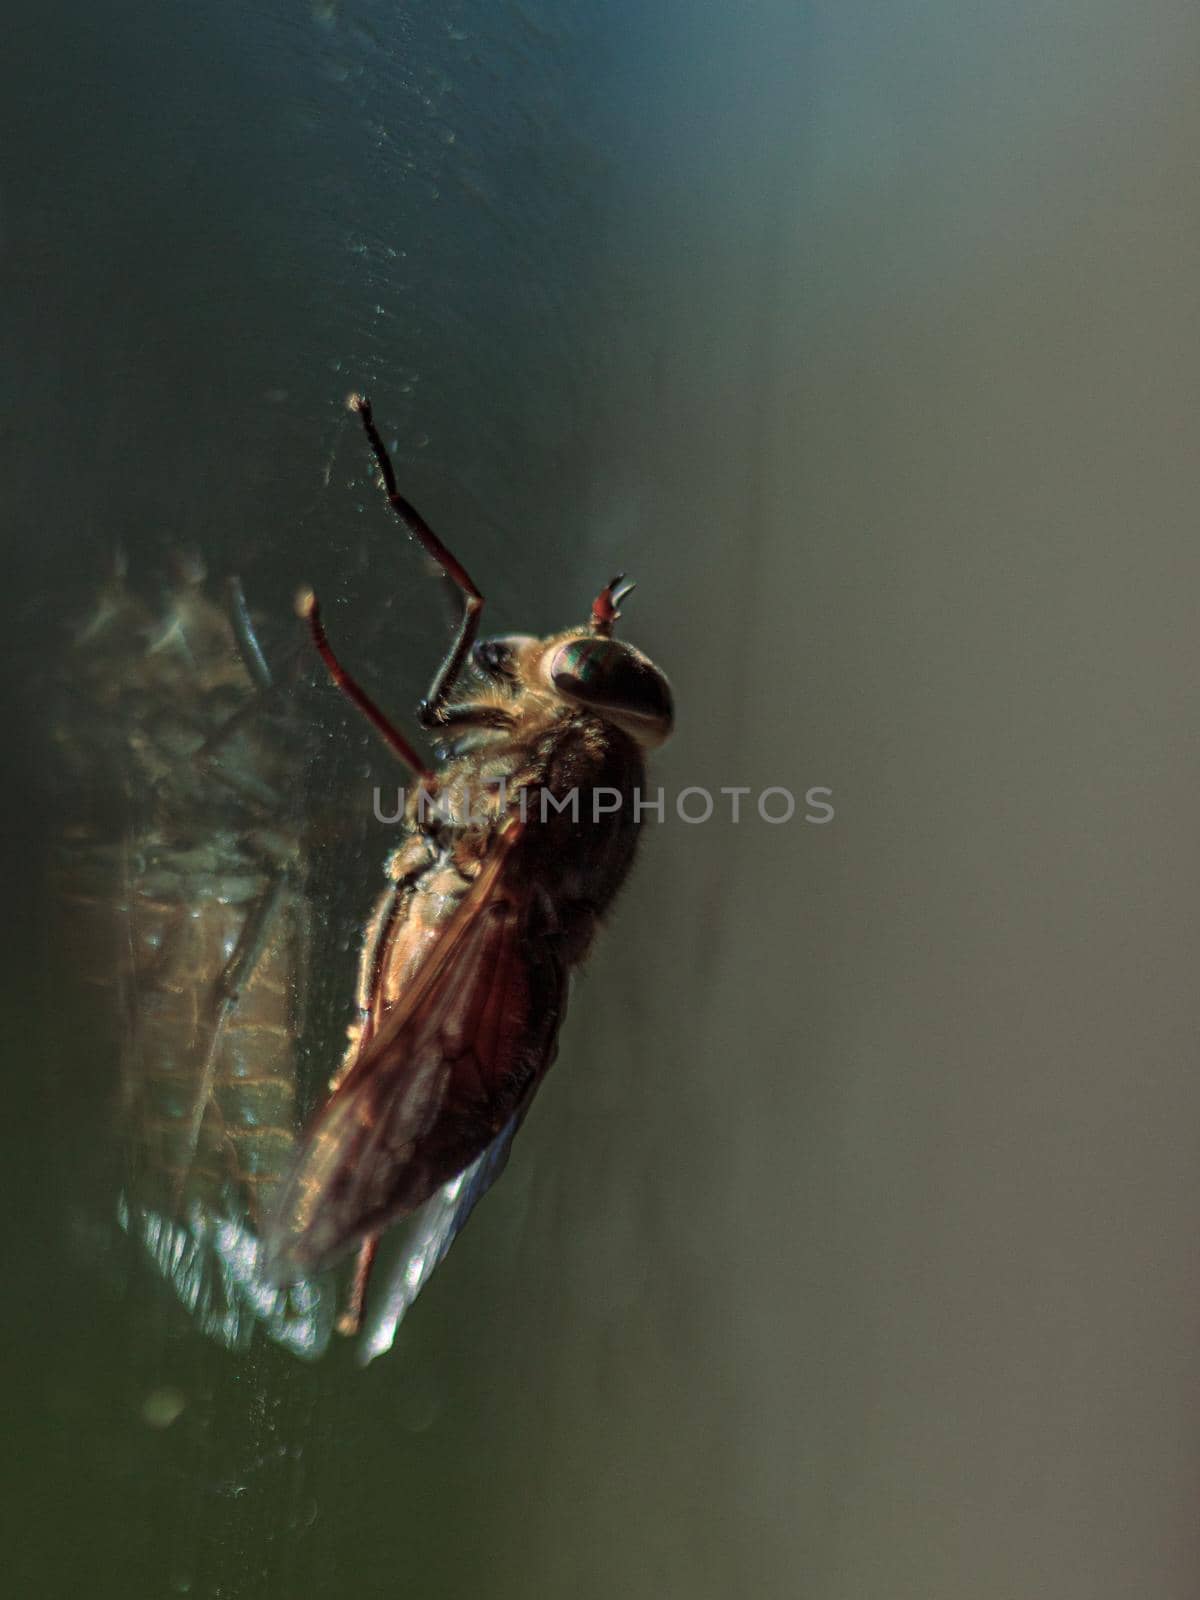 Fly sitting on window glass, colorful insect eyes